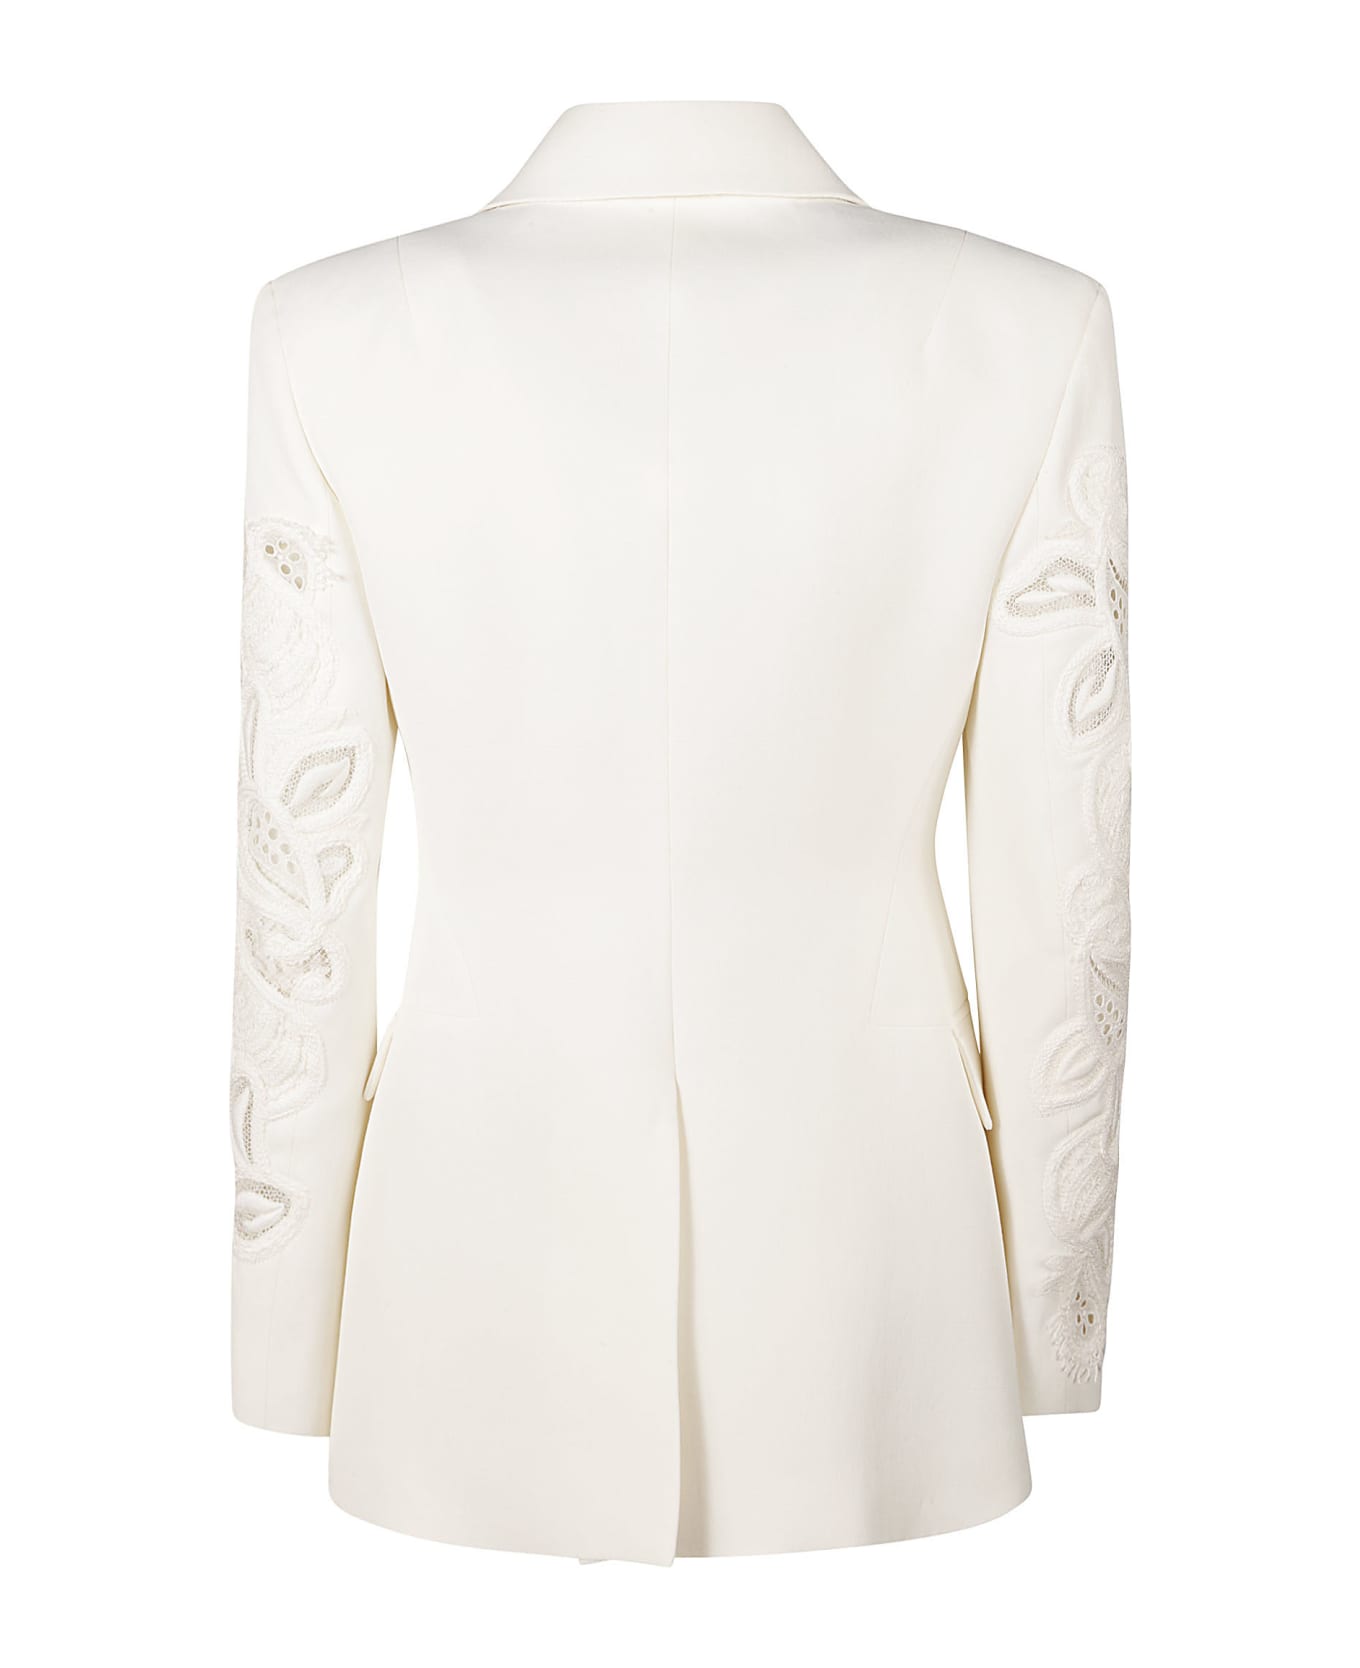 Ermanno Scervino Floral Perforated Sleeve Blazer - White